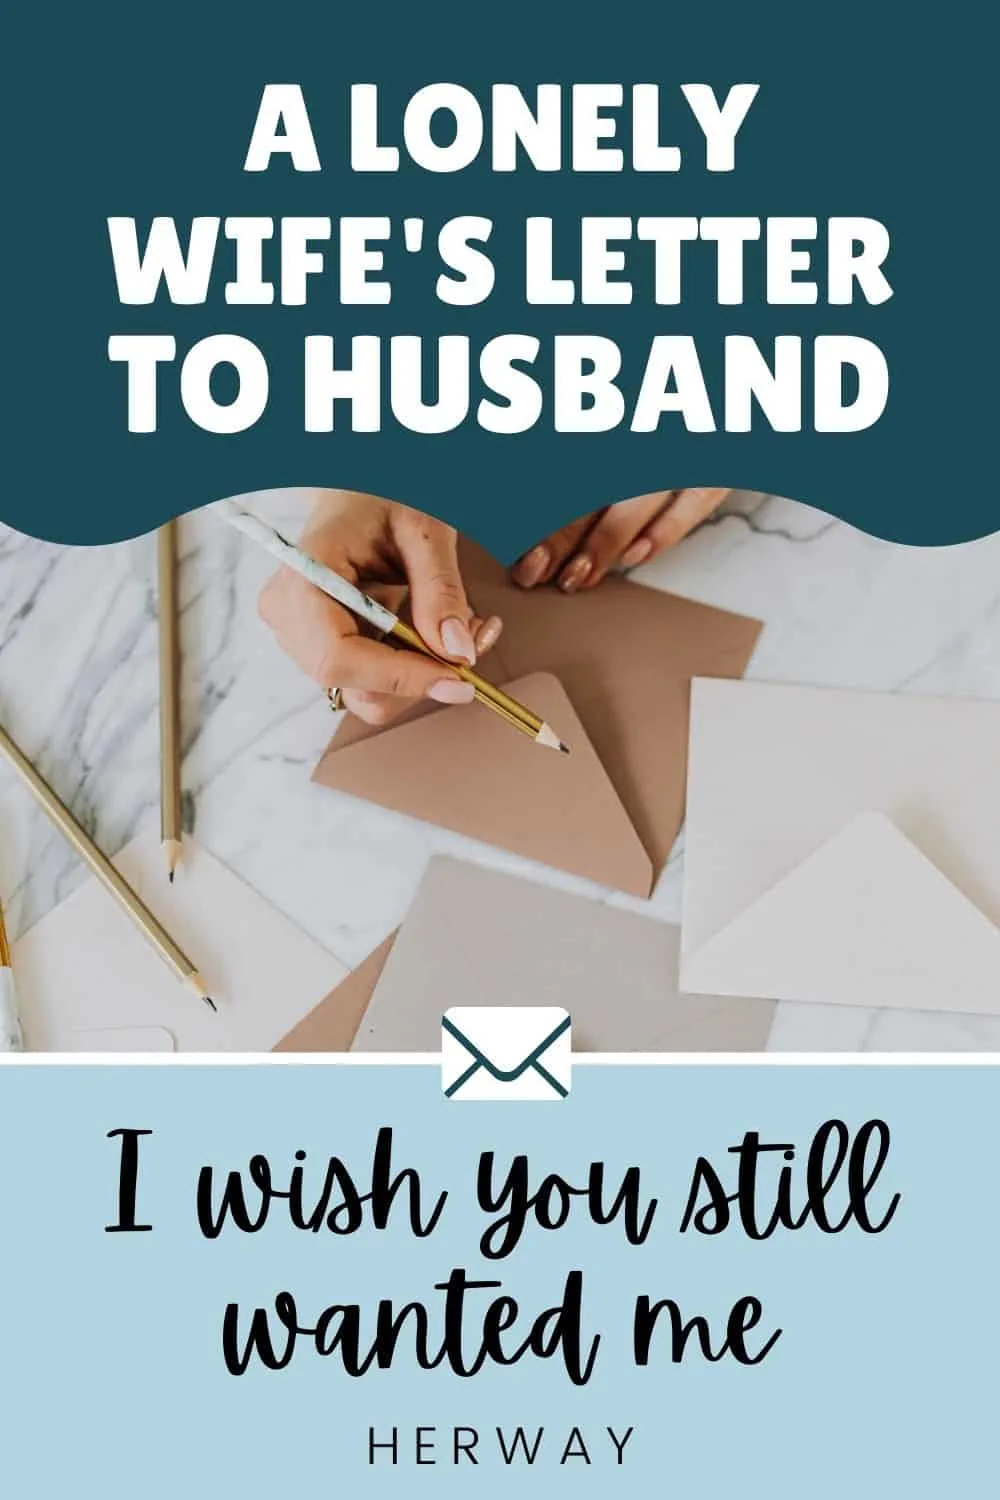 A Lonely Wife's Letter To Husband (I Wish You Still Wanted Me) Pinterest